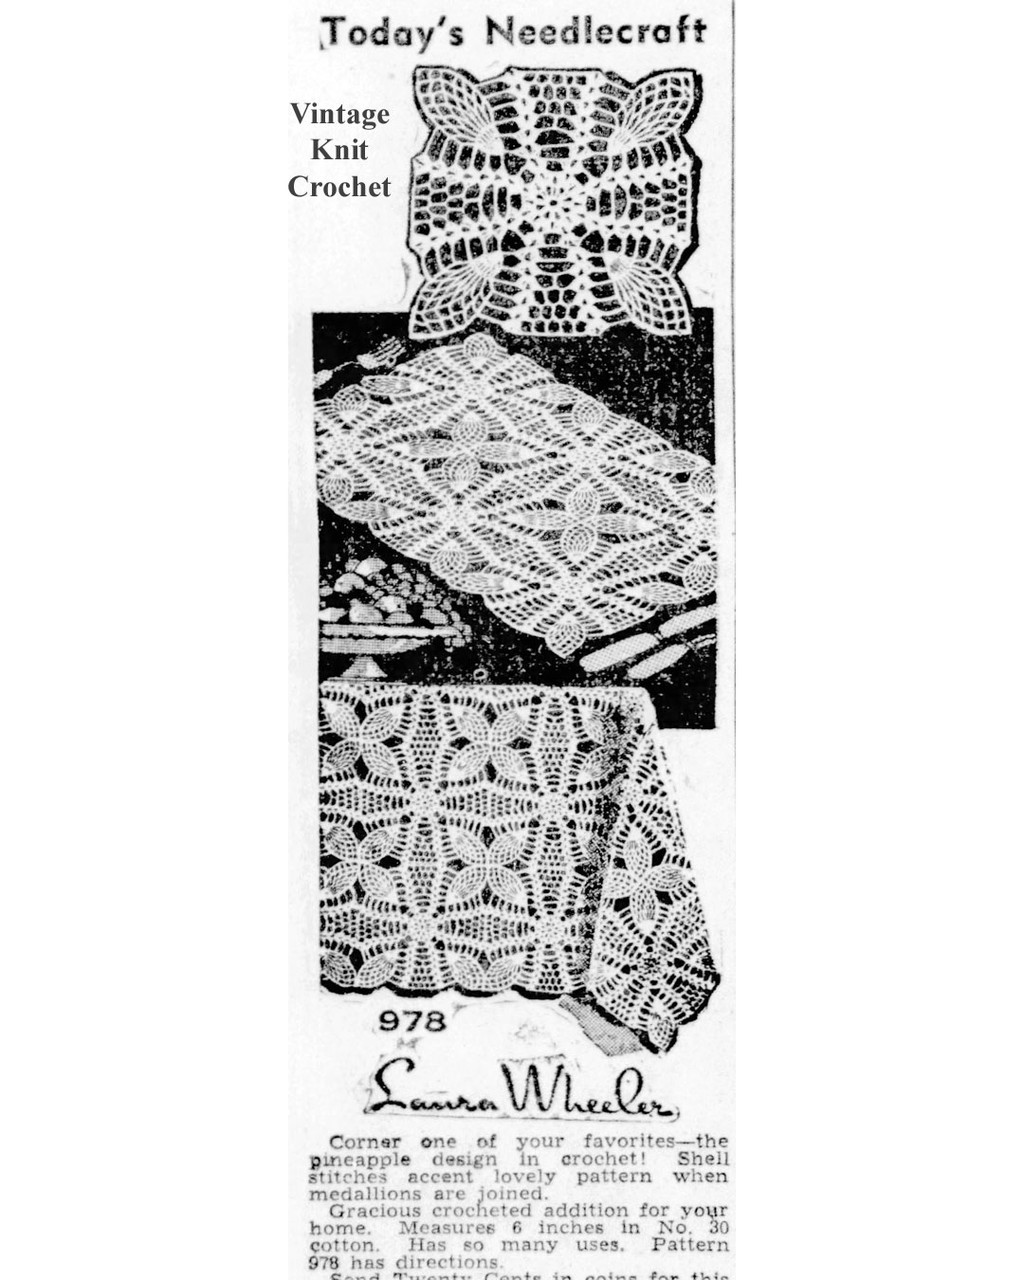 Mail Order Design 980 Crochet Tablecloth Square Newspaper Advertisement